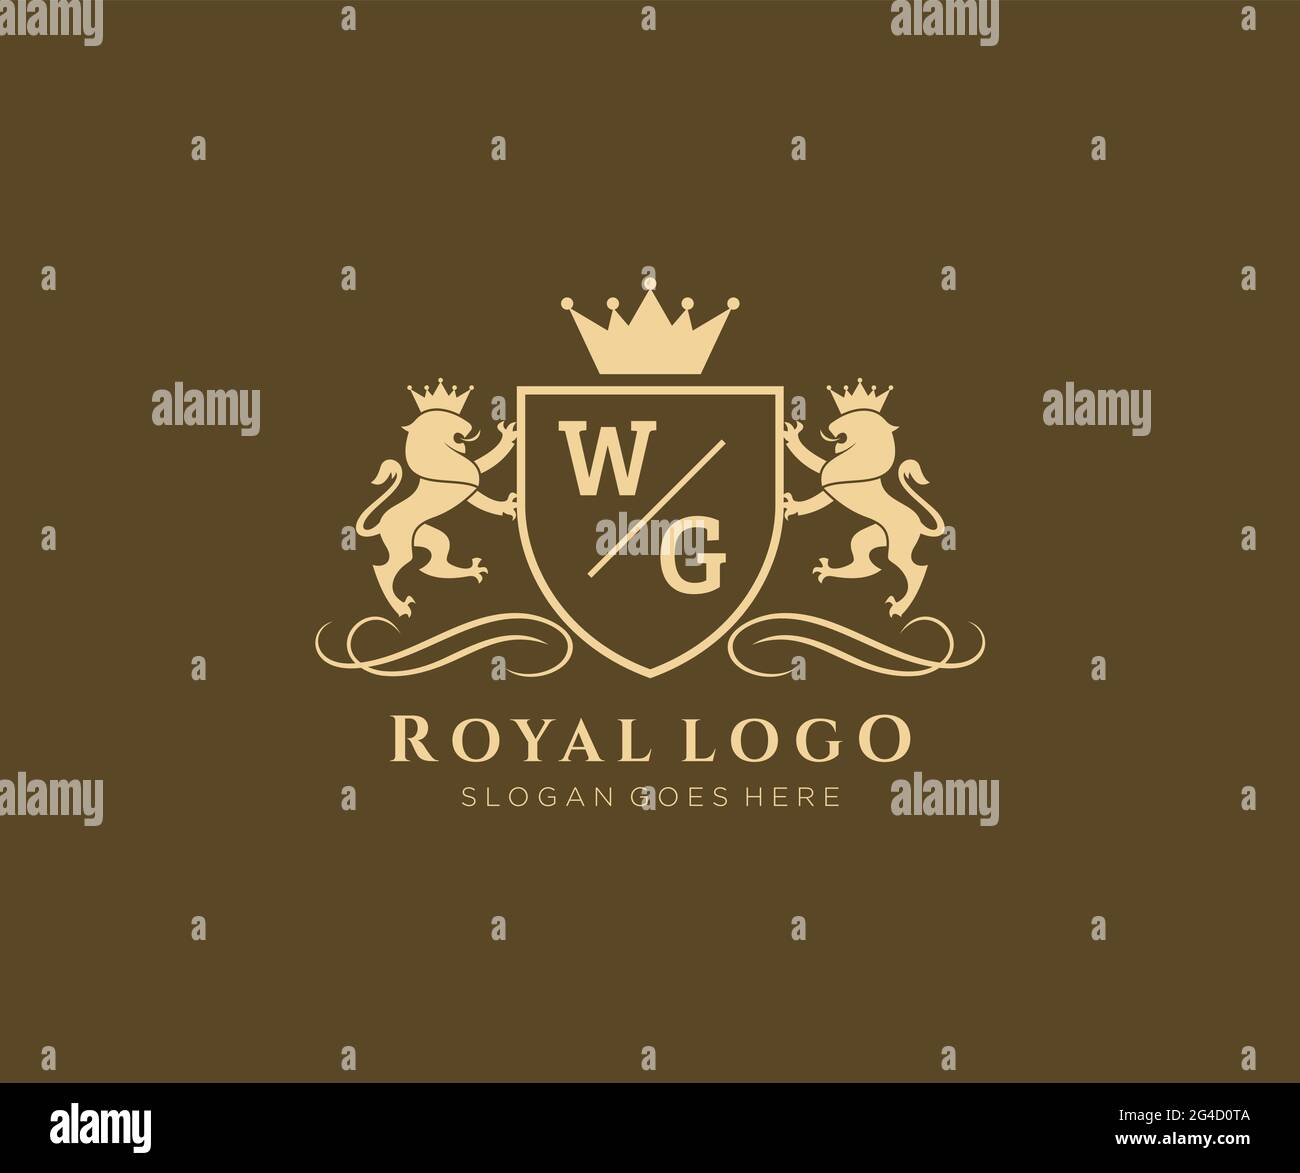 WG Letter Lion Royal Luxury Heraldic,Crest Logo template in vector art for Restaurant, Royalty, Boutique, Cafe, Hotel, Heraldic, Jewelry, Fashion and Stock Vector